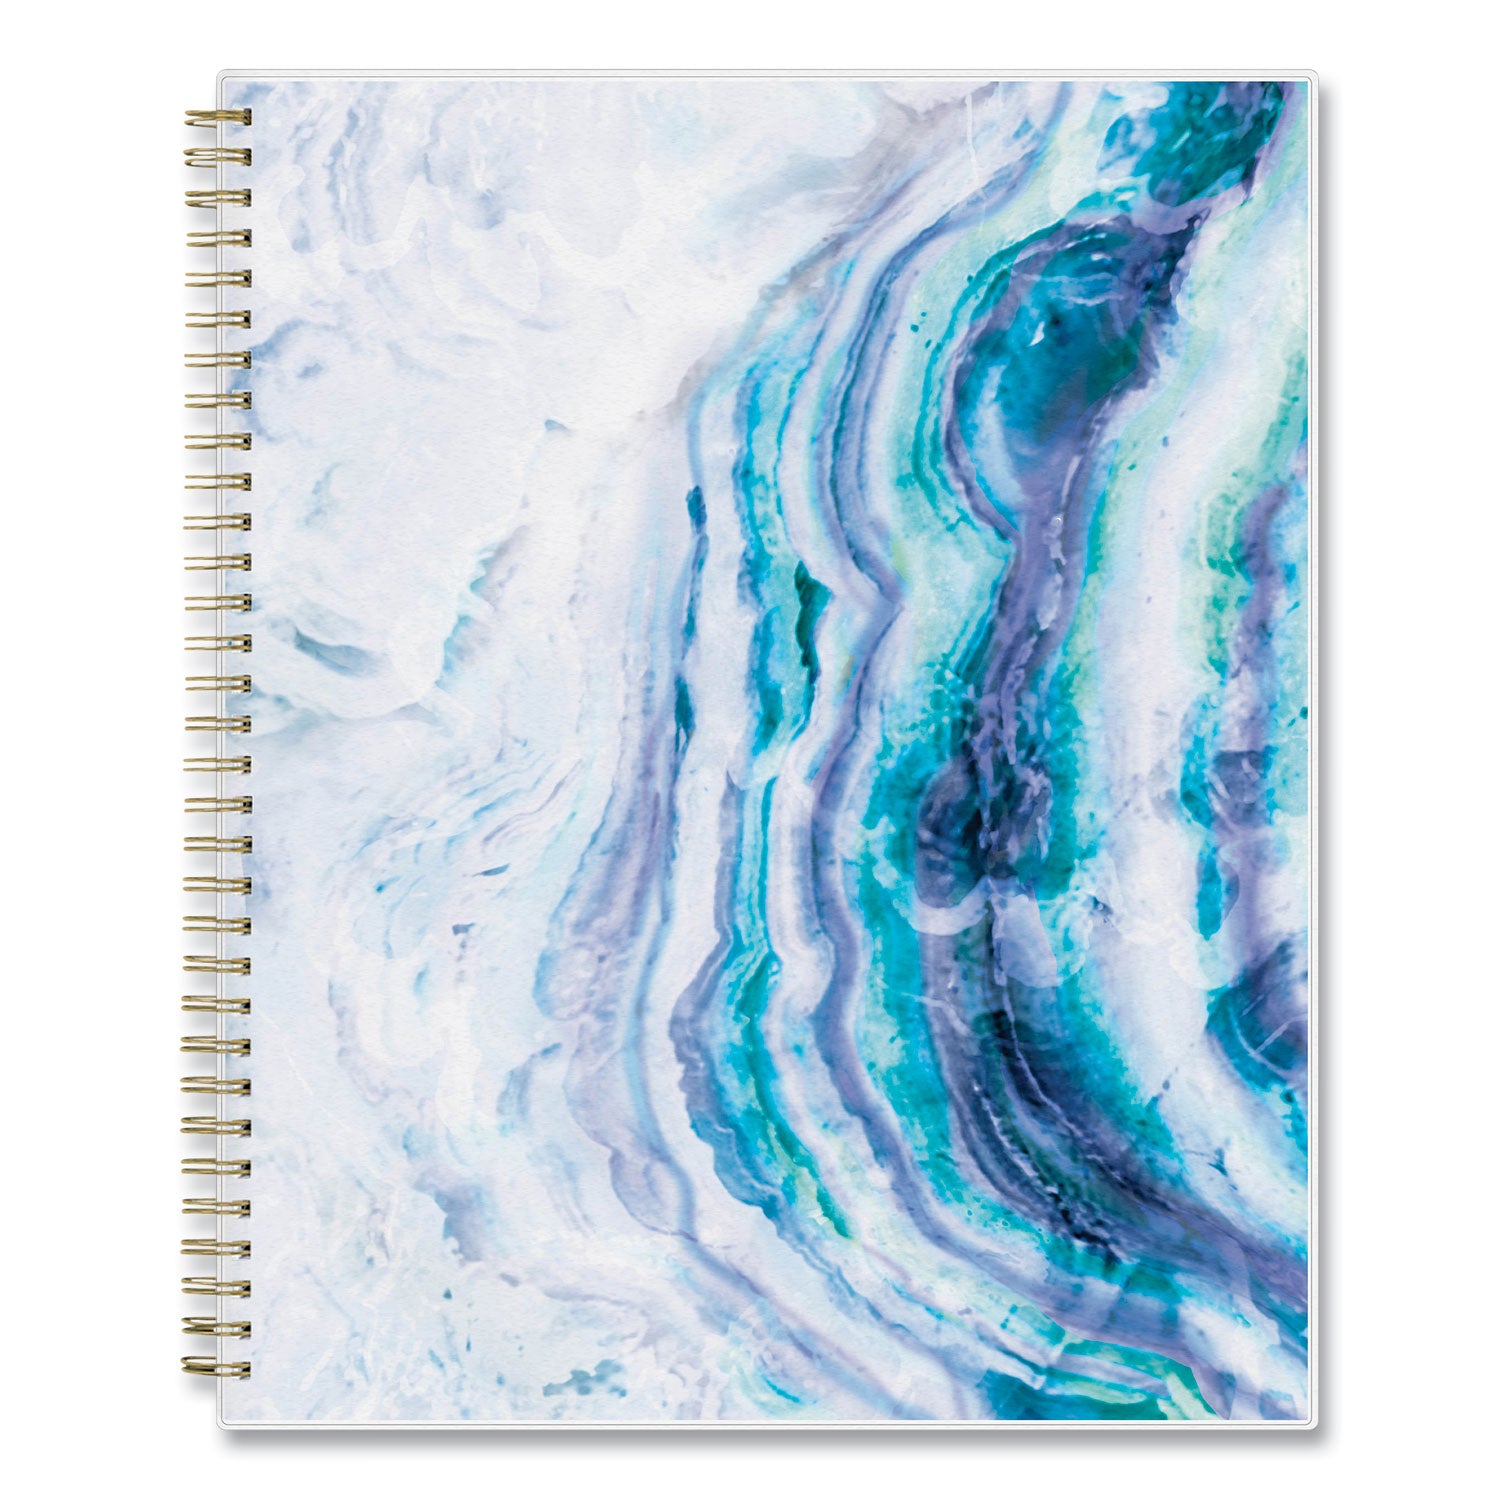 gemma-academic-year-weekly-monthly-planner-geode-artwork-11-x-85-blue-purple-cover-12-month-july-june-2023-2024_bls118177 - 2